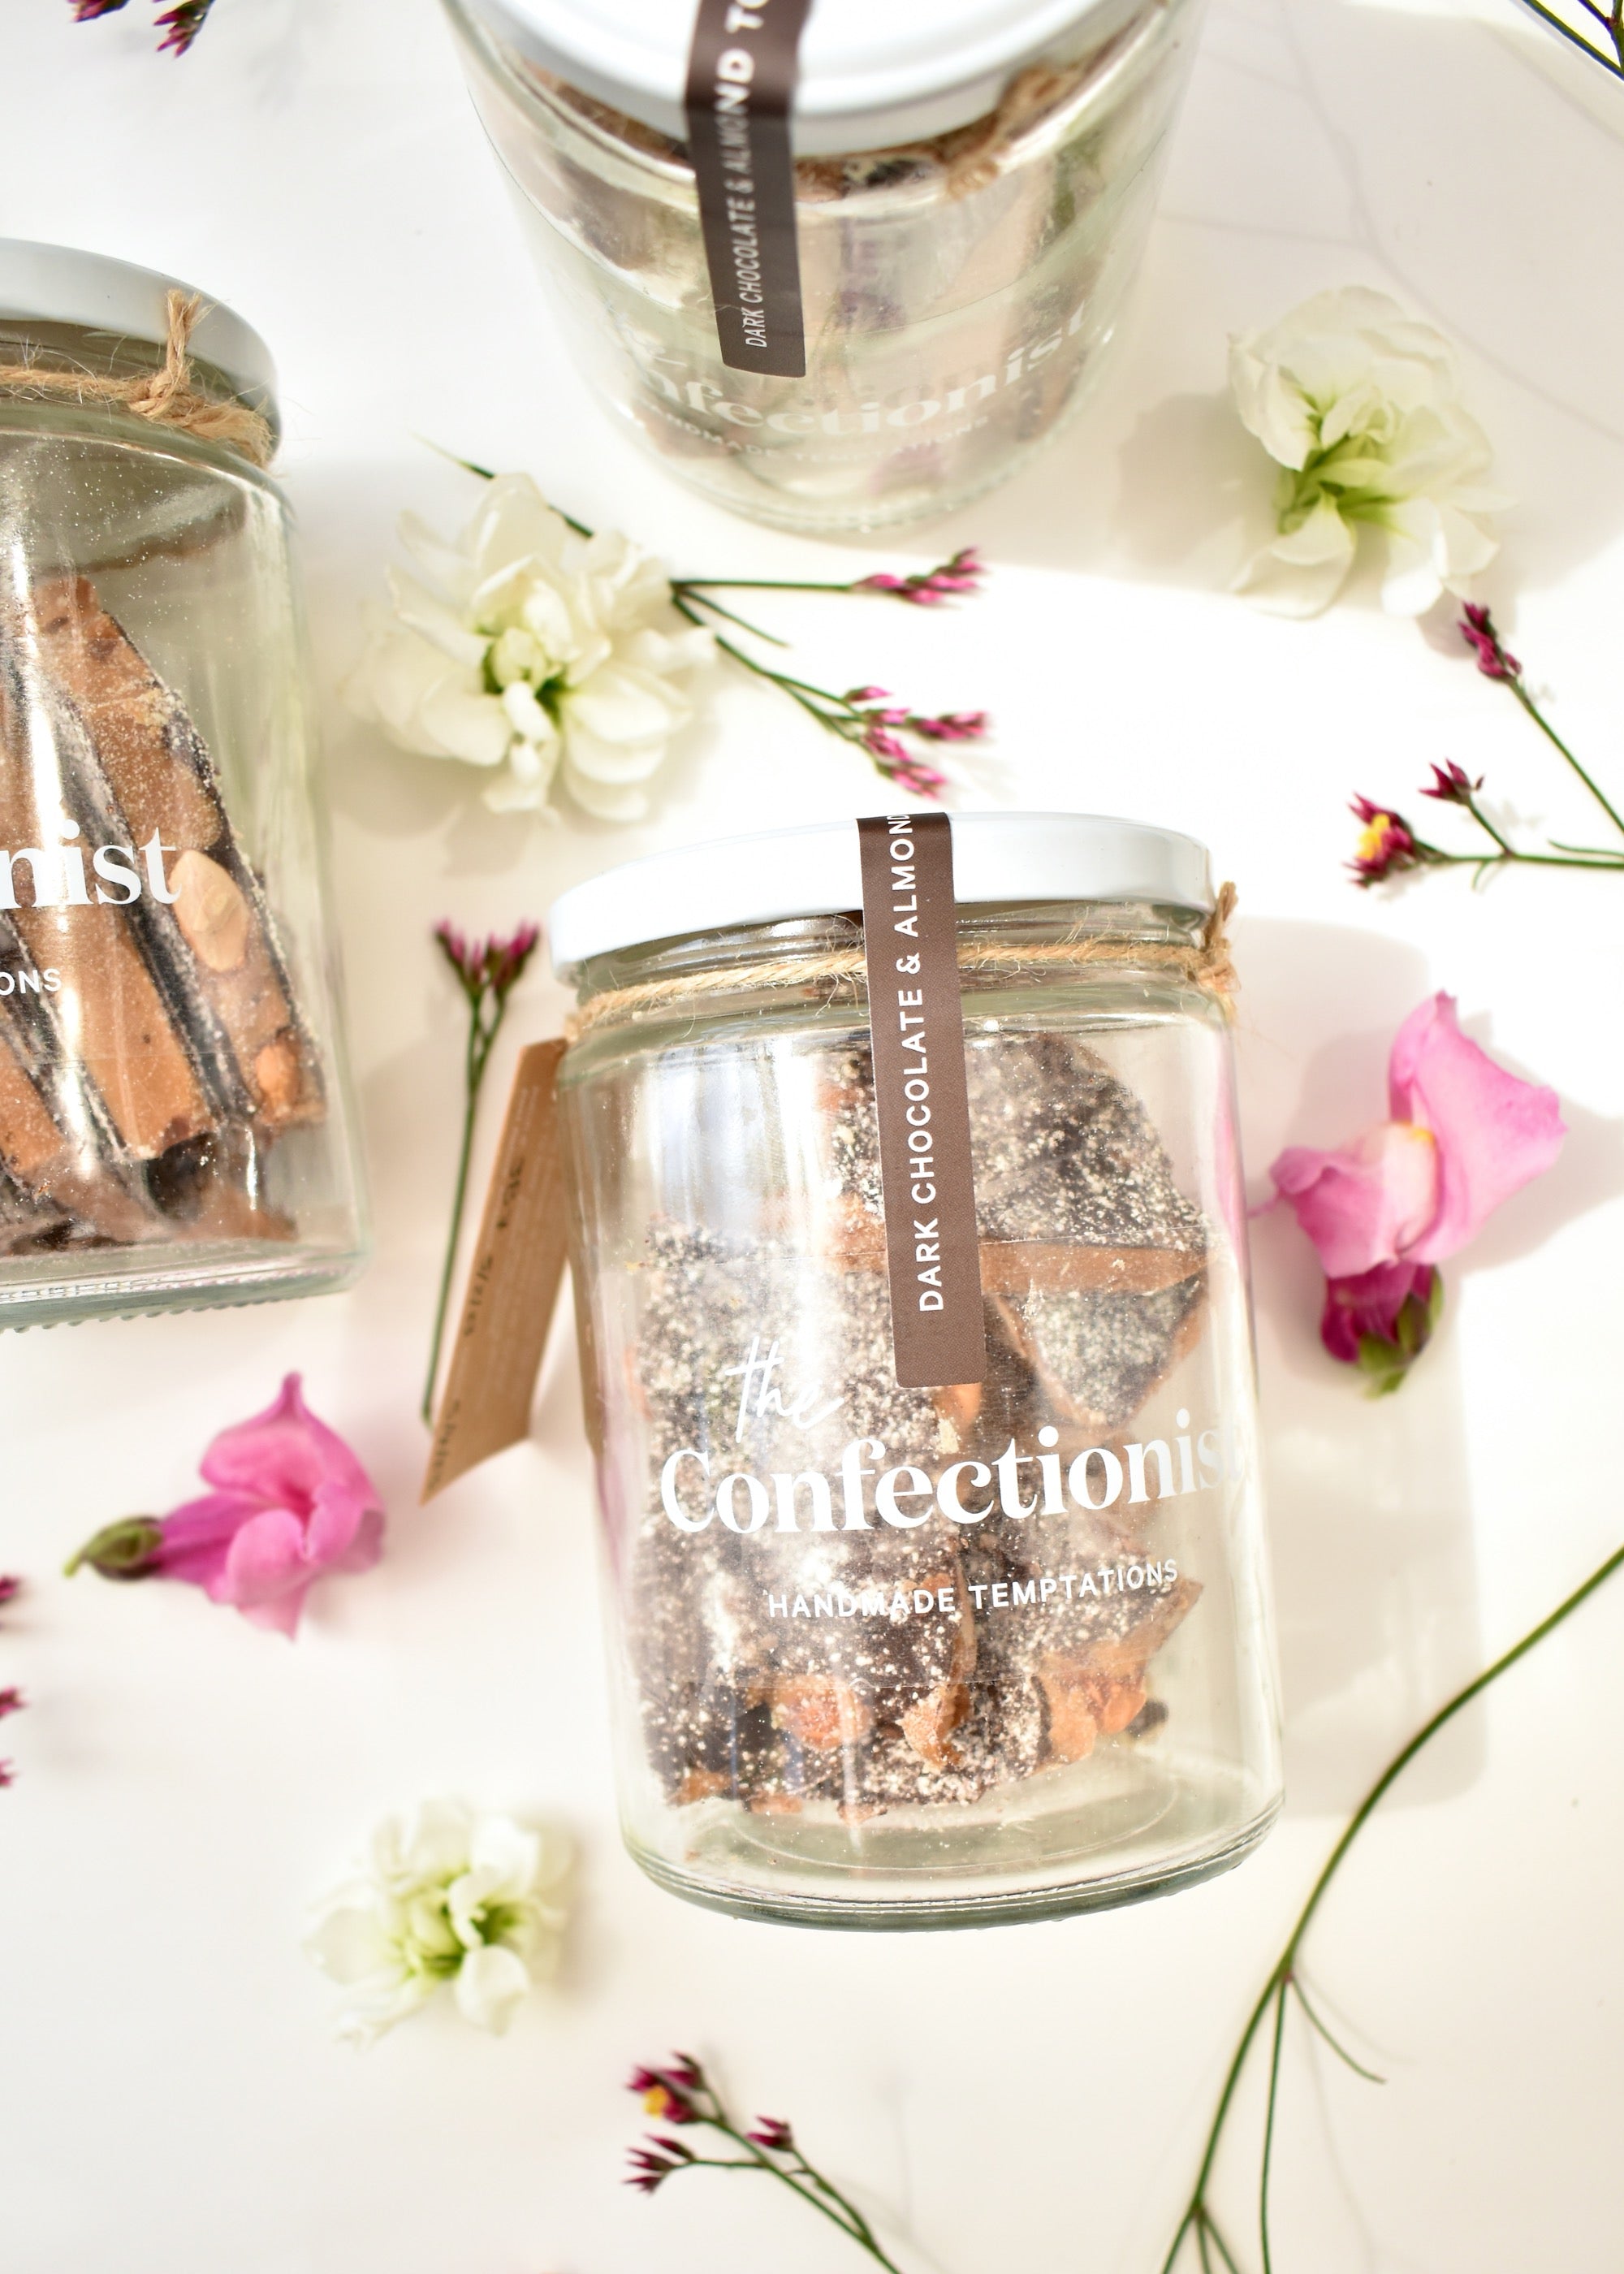 Flat lay image of jars of dark chocolate and almond toffee. White background with pink and white flowers